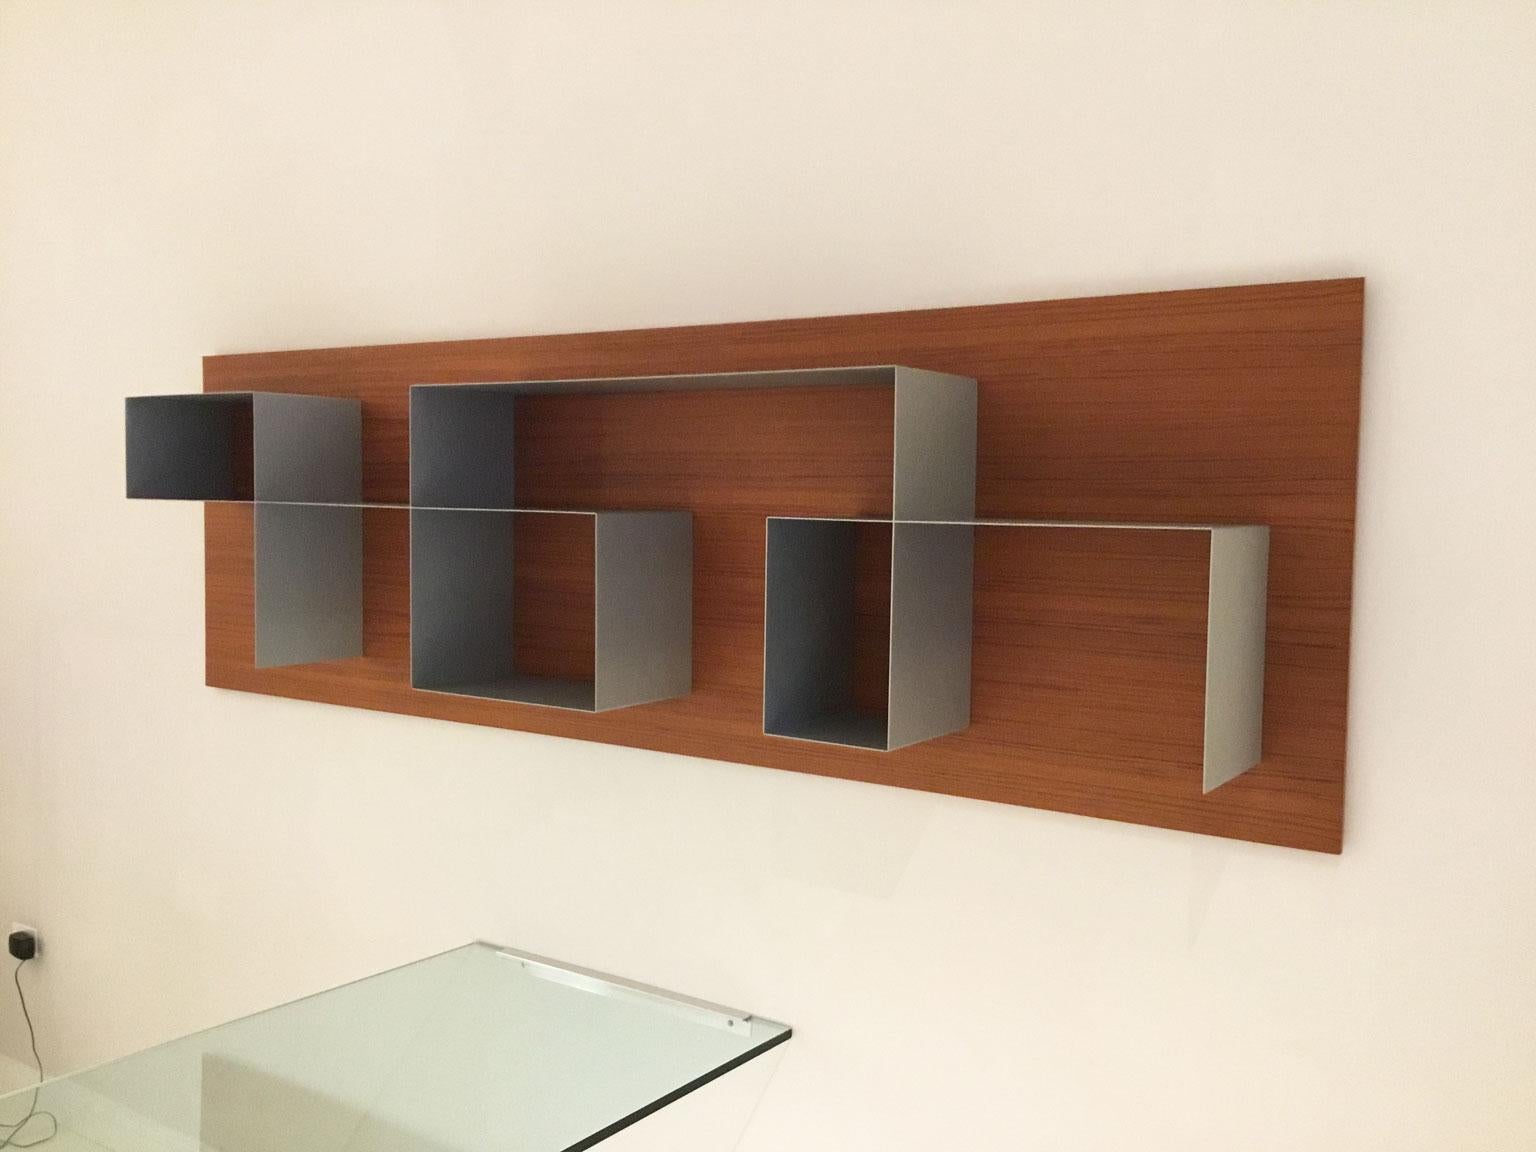 Bookcase unit to be horizontally or vertically positioned. Shelves in aluminium varnished folded sheet metal. Back panel in teak wood.

Designed by Giuseppe Vigano for Tisettanta 

Dimensions
27.5